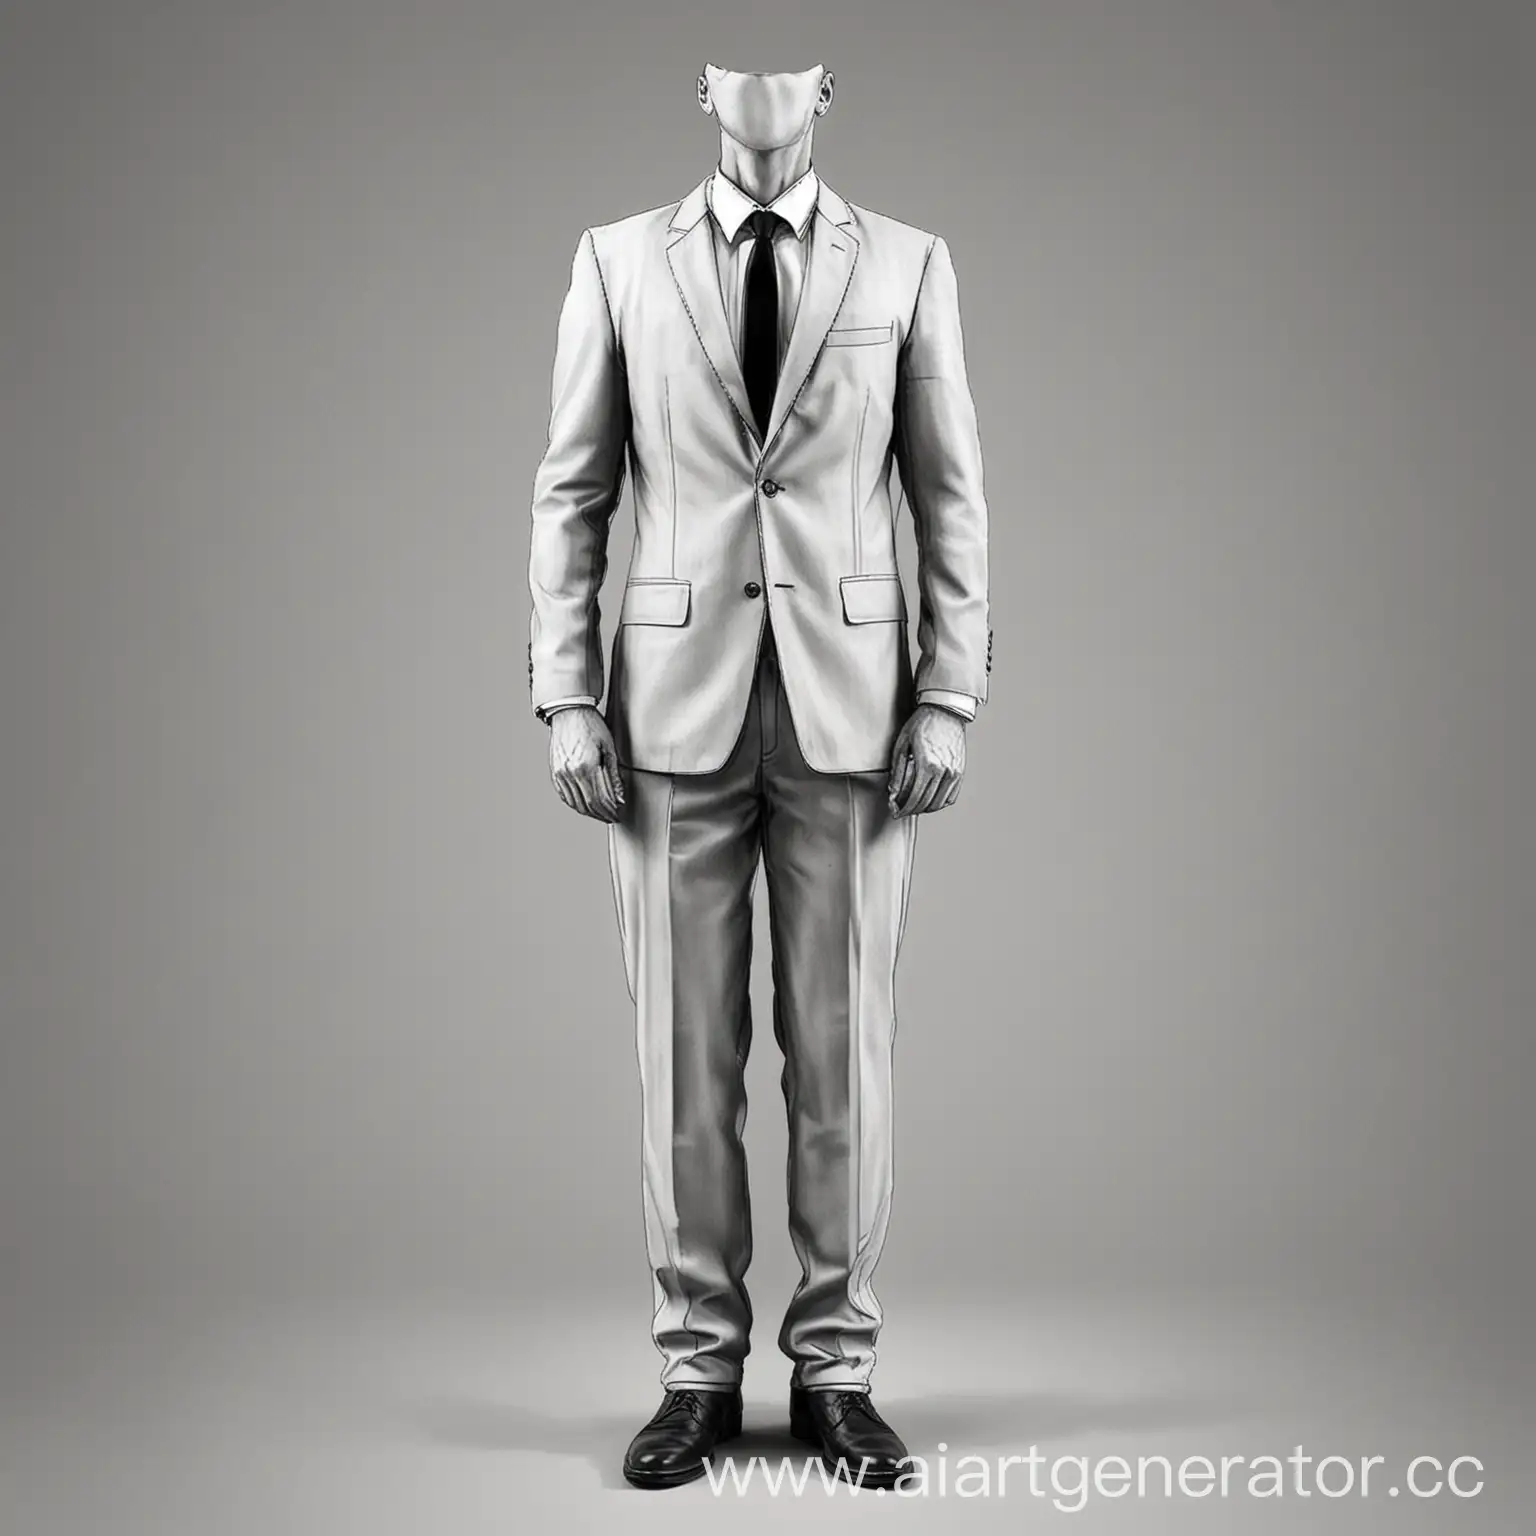 Elegant-Line-Art-of-a-Person-in-a-Suit-Standing-Upright-from-the-Front-View